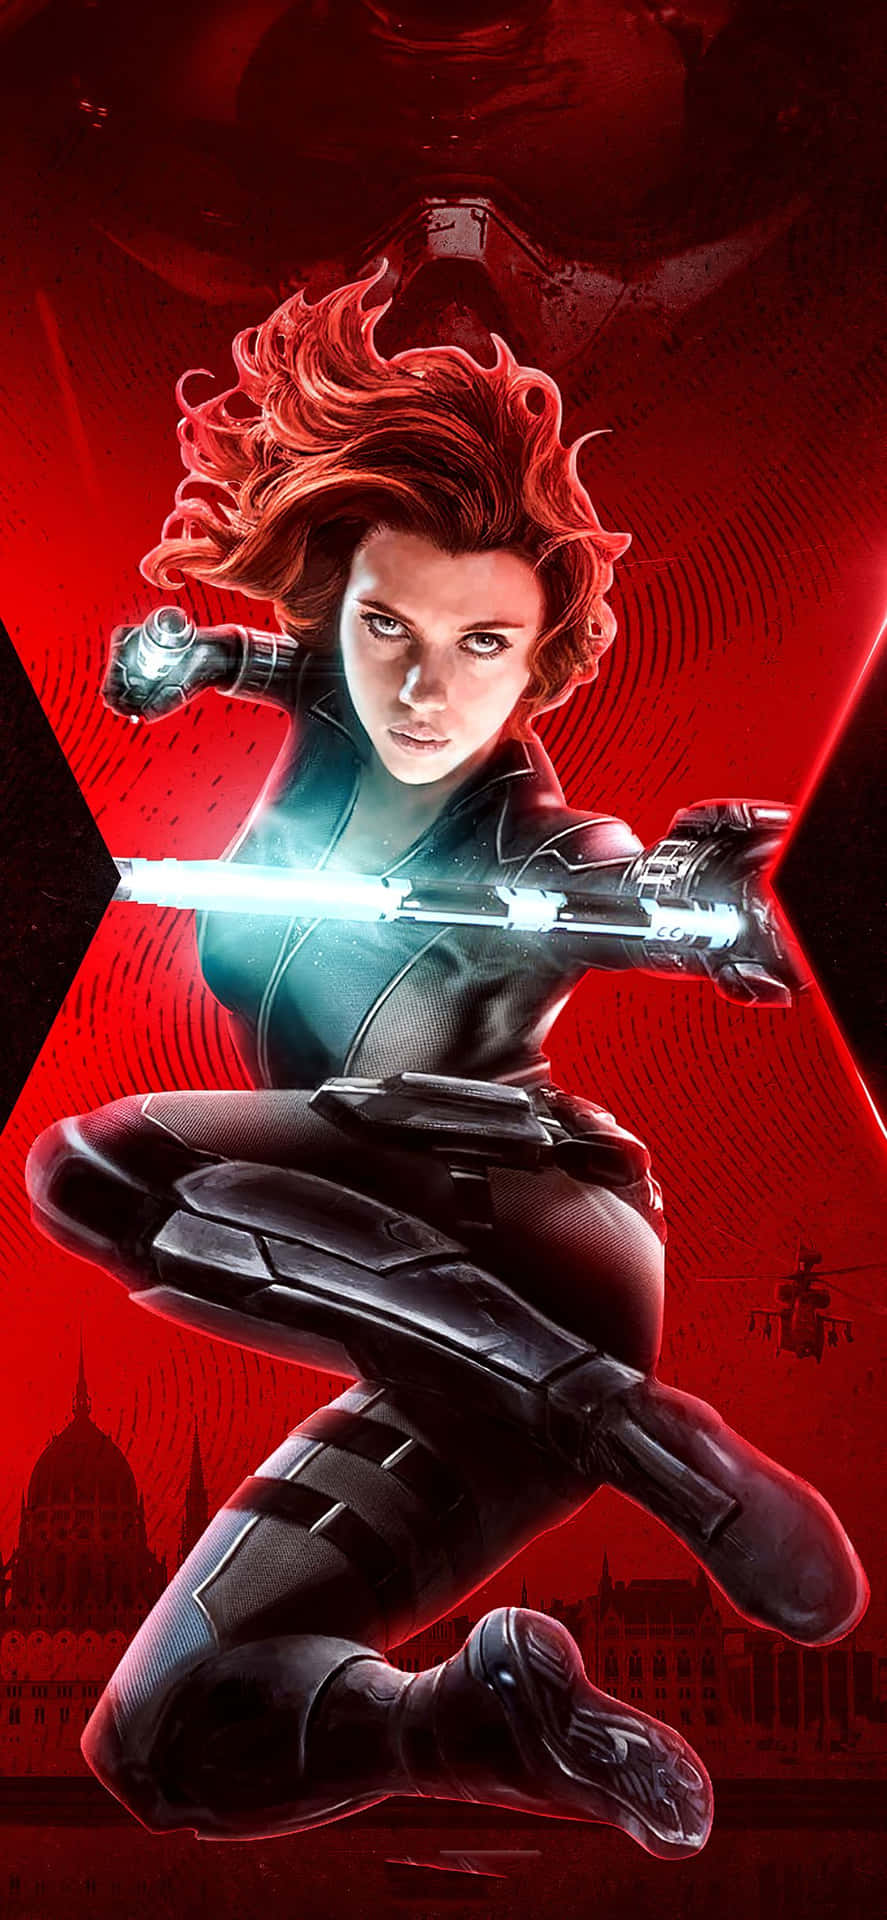 The Black Widow Iphone - A Powerful, Stylish and Alluring Device Wallpaper